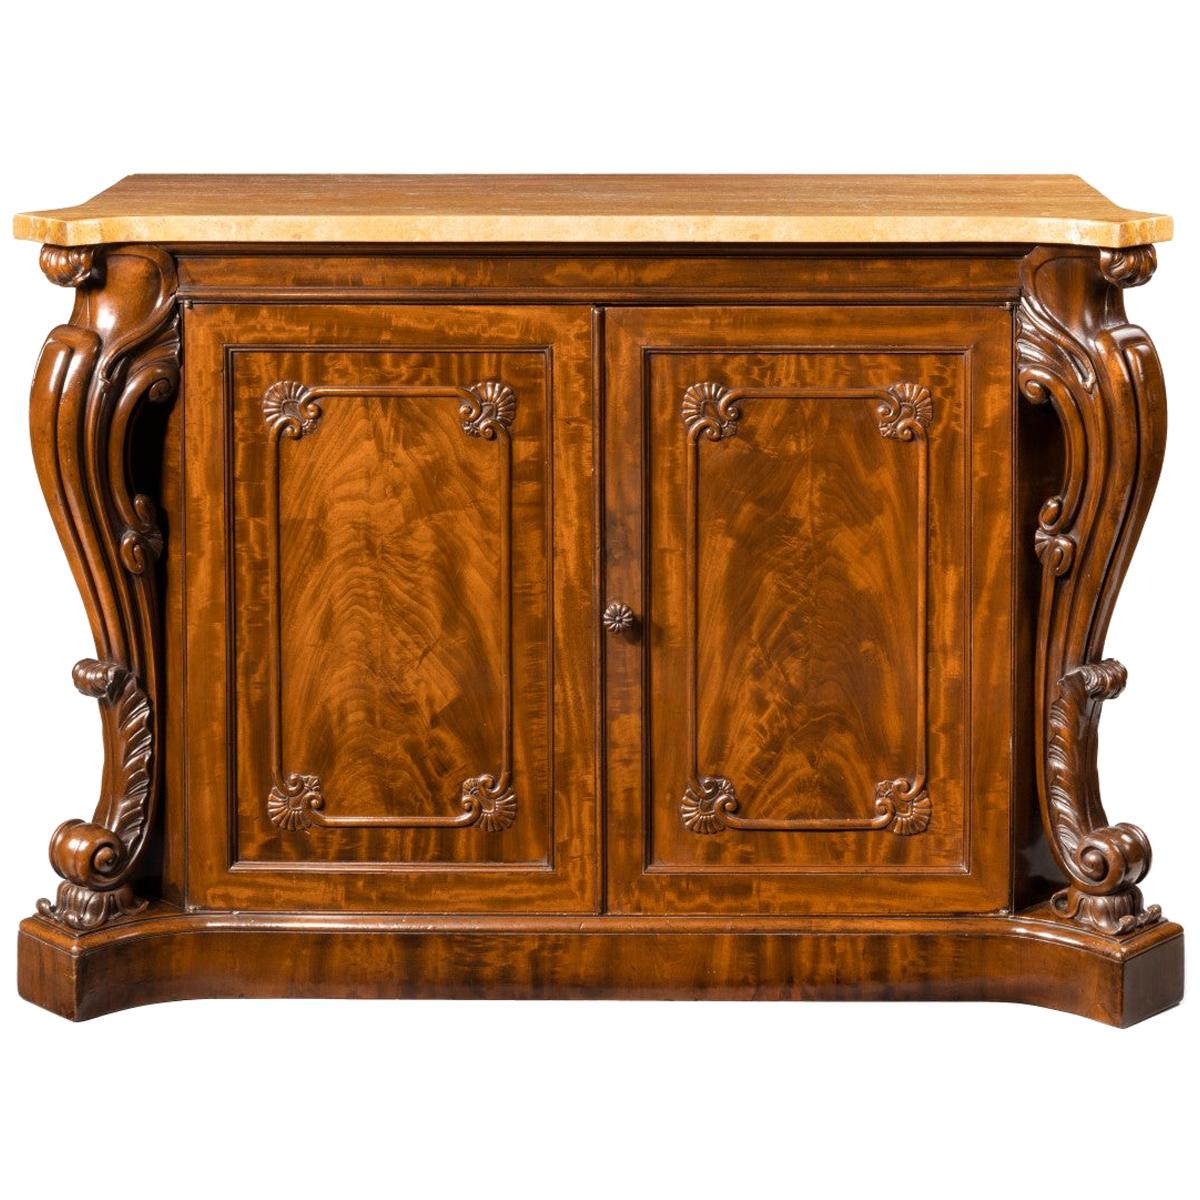 Early Victorian Two-Door Mahogany Side Cabinet Attributed to Gillows